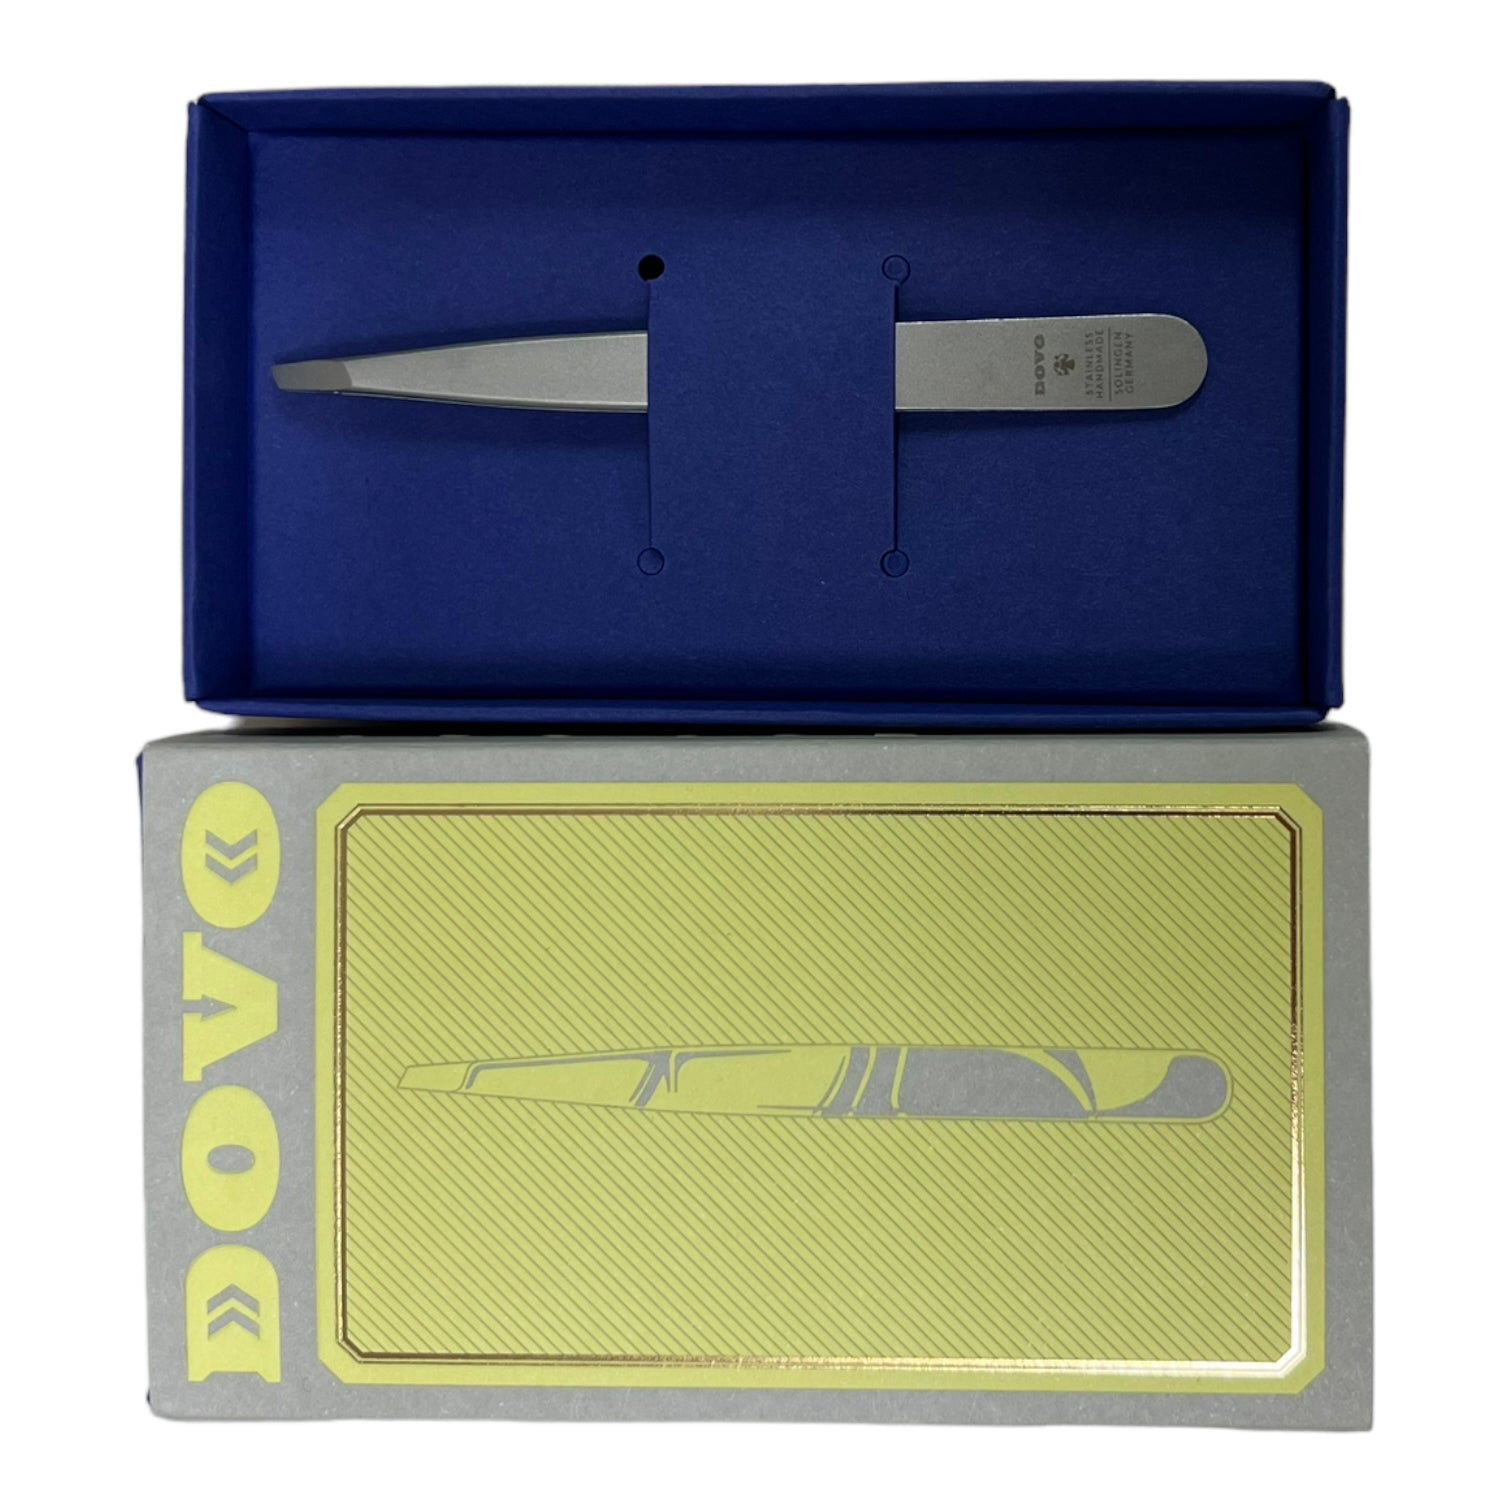 Dovo - Pocket Toe Nail Clipper, 3 1/4 in, Stainless Steel, Cover, German  (504006)